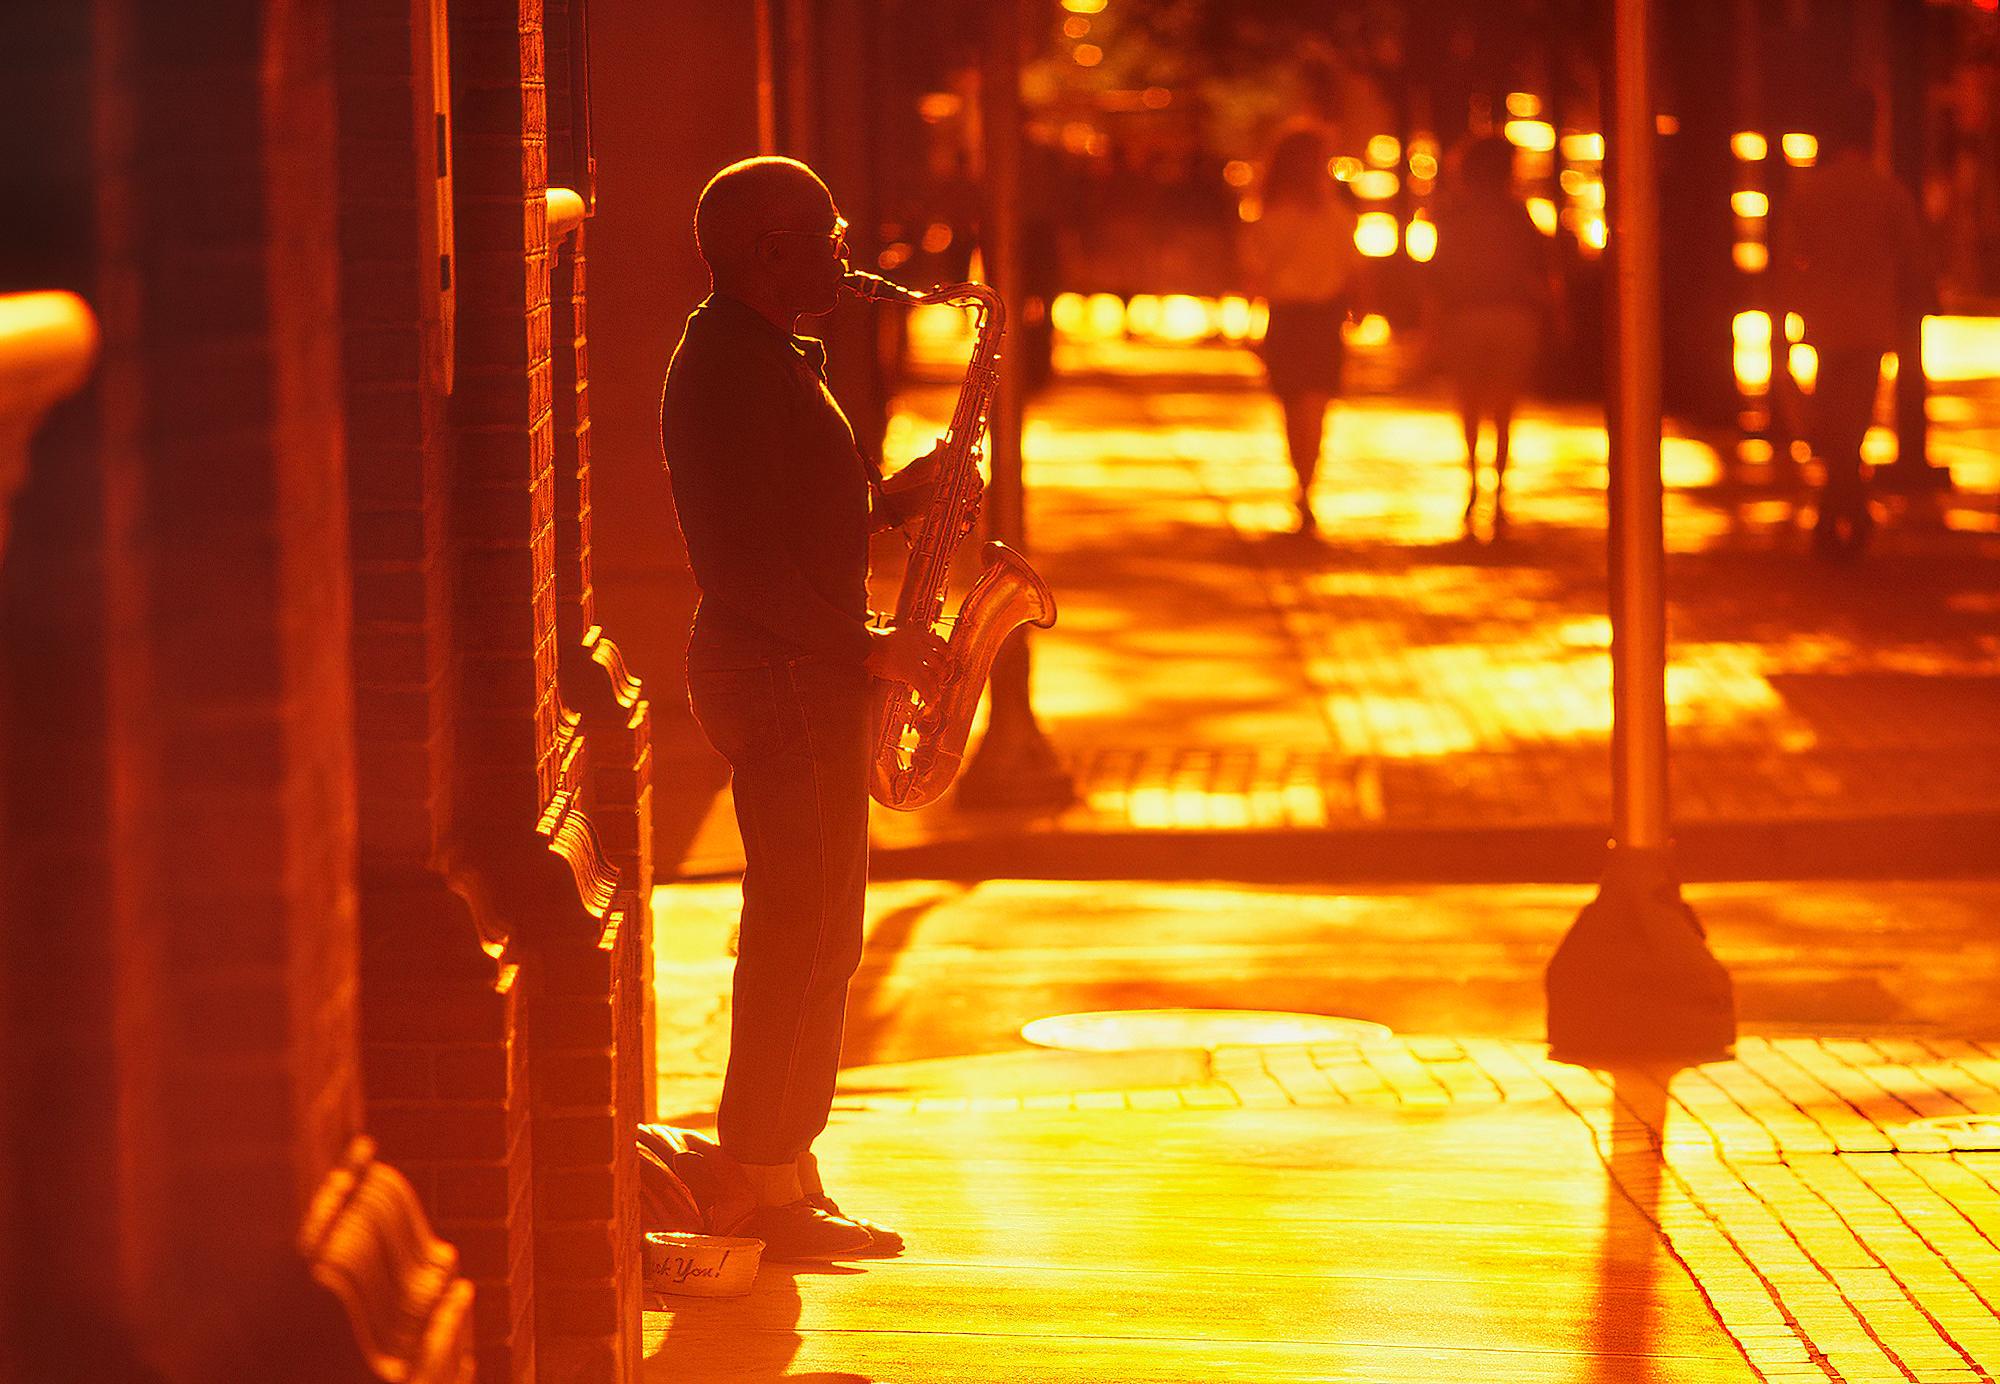 Mitchell Funk Landscape Photograph - Romantic Street Musician Playing the Saxophone in Golden Light and Orange